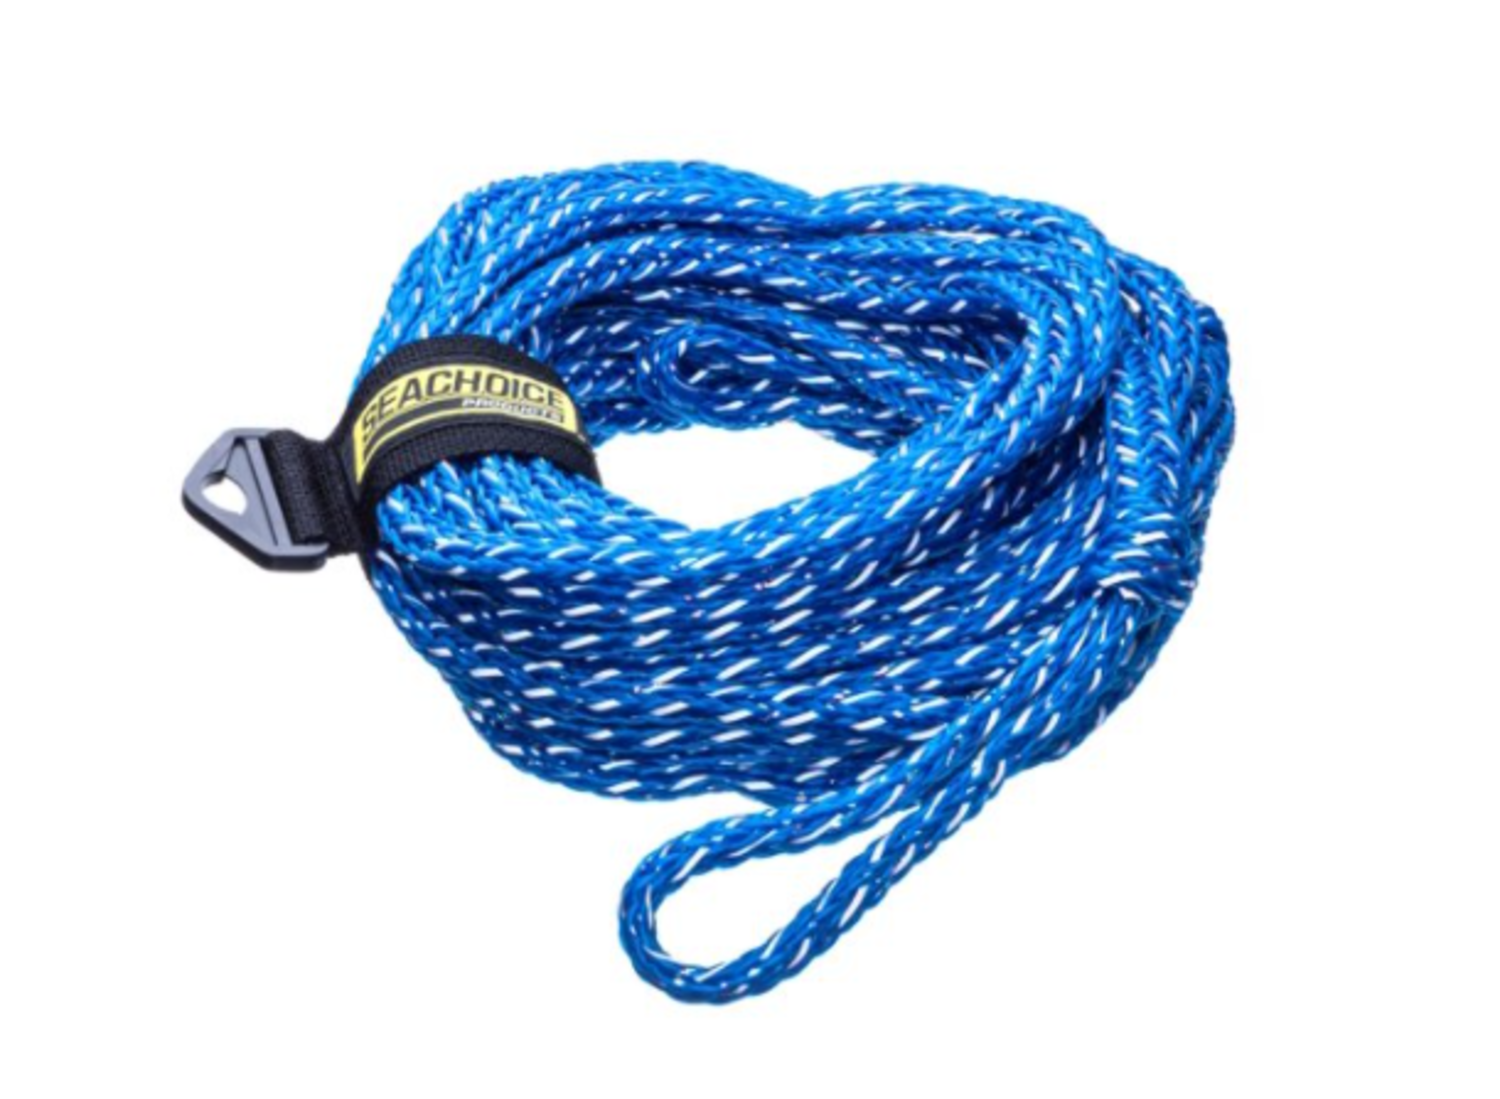 Seachoice - 86739 Tube Tow Reflective Rope, 60', Tows Up to 2 Riders